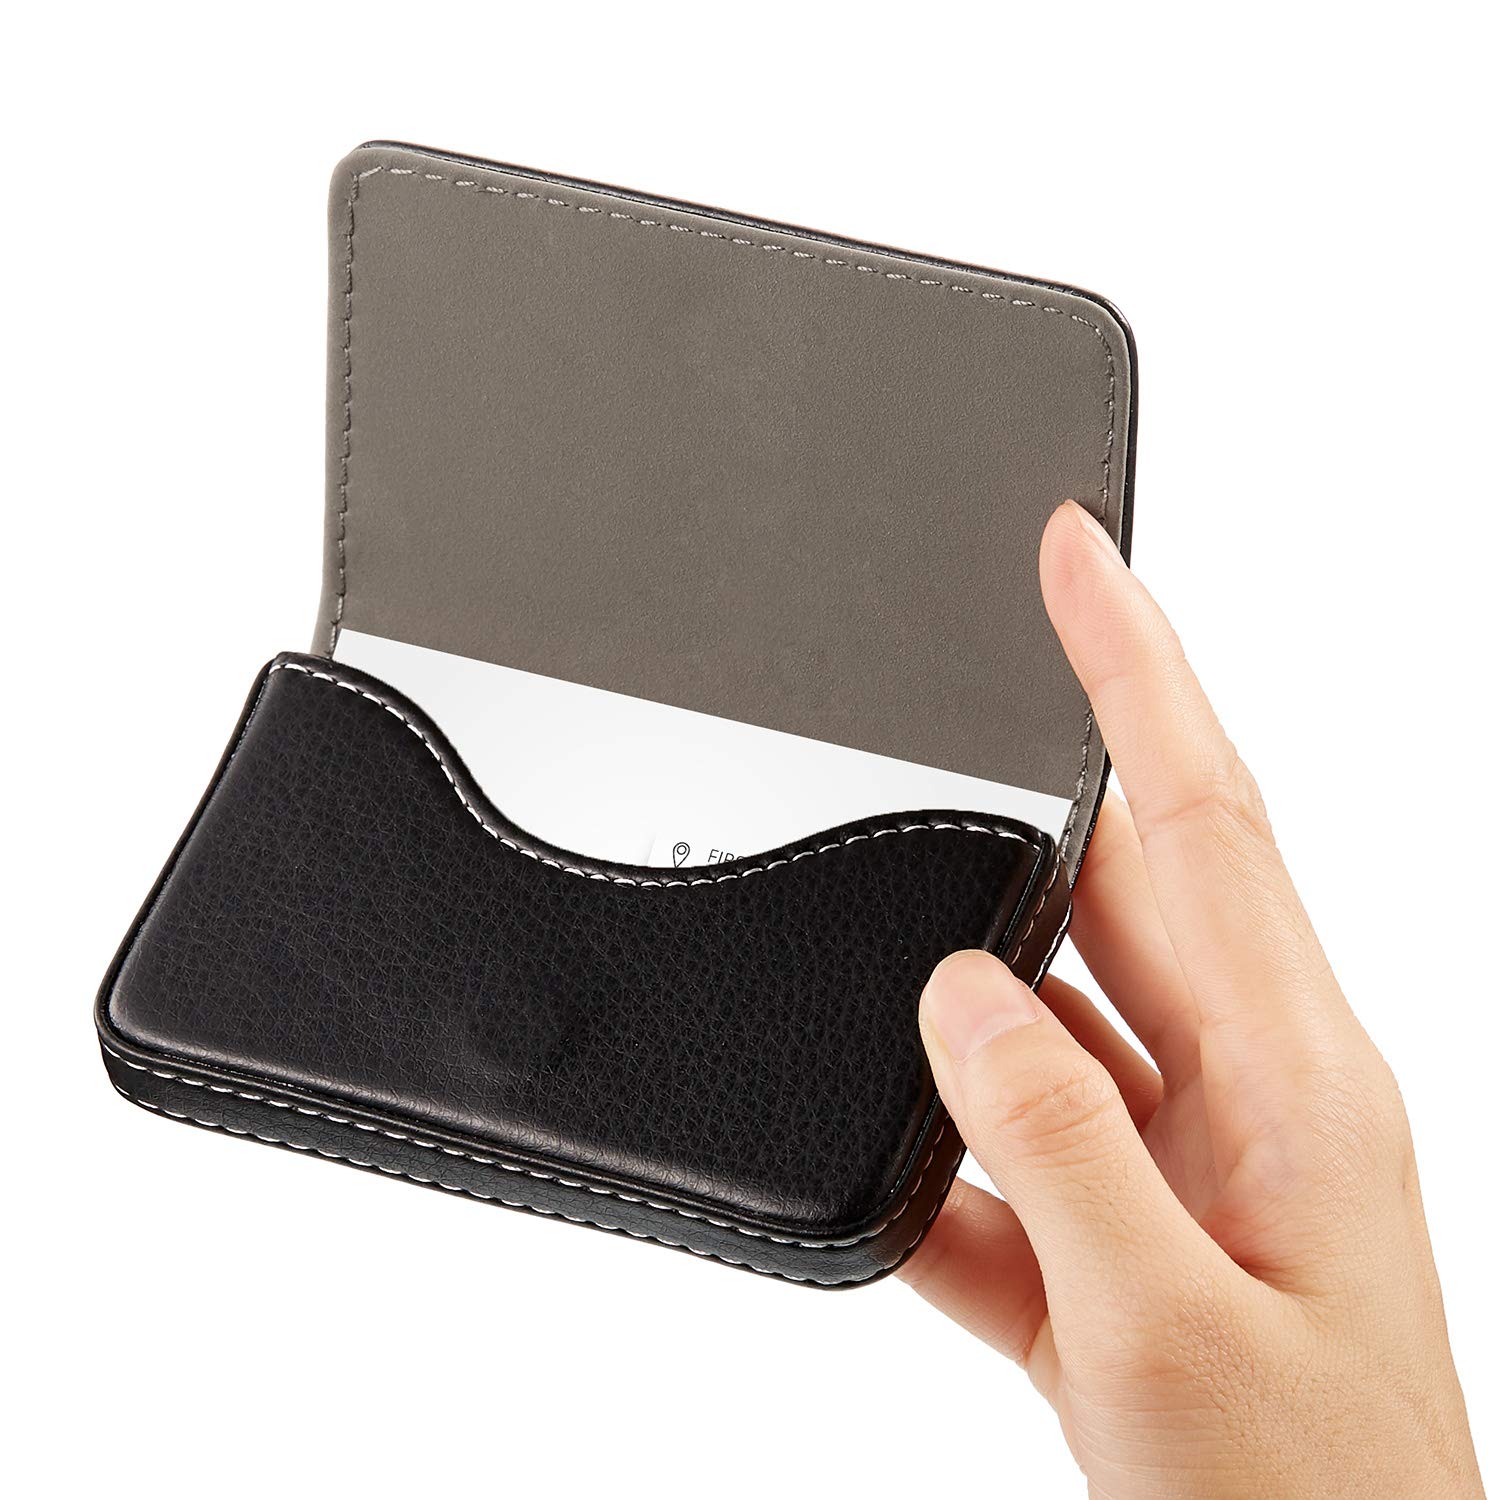 Outus 2 Pieces Business Card Holder, Business Card Wallet Leather Business Card Case Pocket Business Name Card Holder with Magnetic Shut, Credit Card ID Case wallet (Black and Coffee)